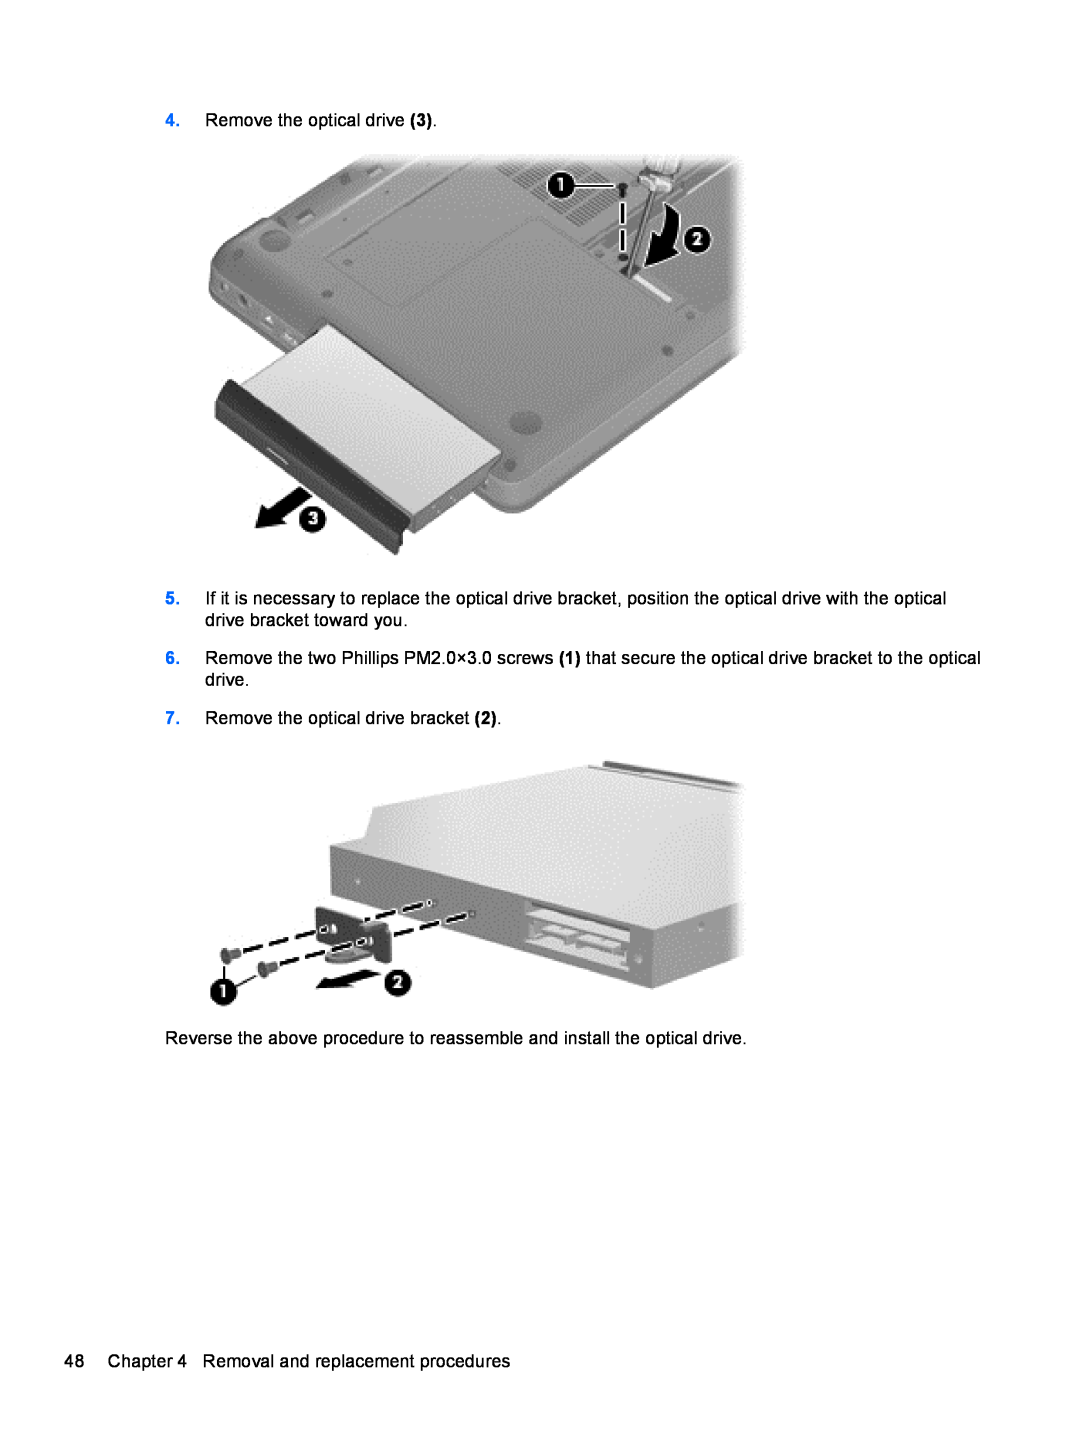 Compaq CQ42 manual Remove the optical drive bracket, Removal and replacement procedures 